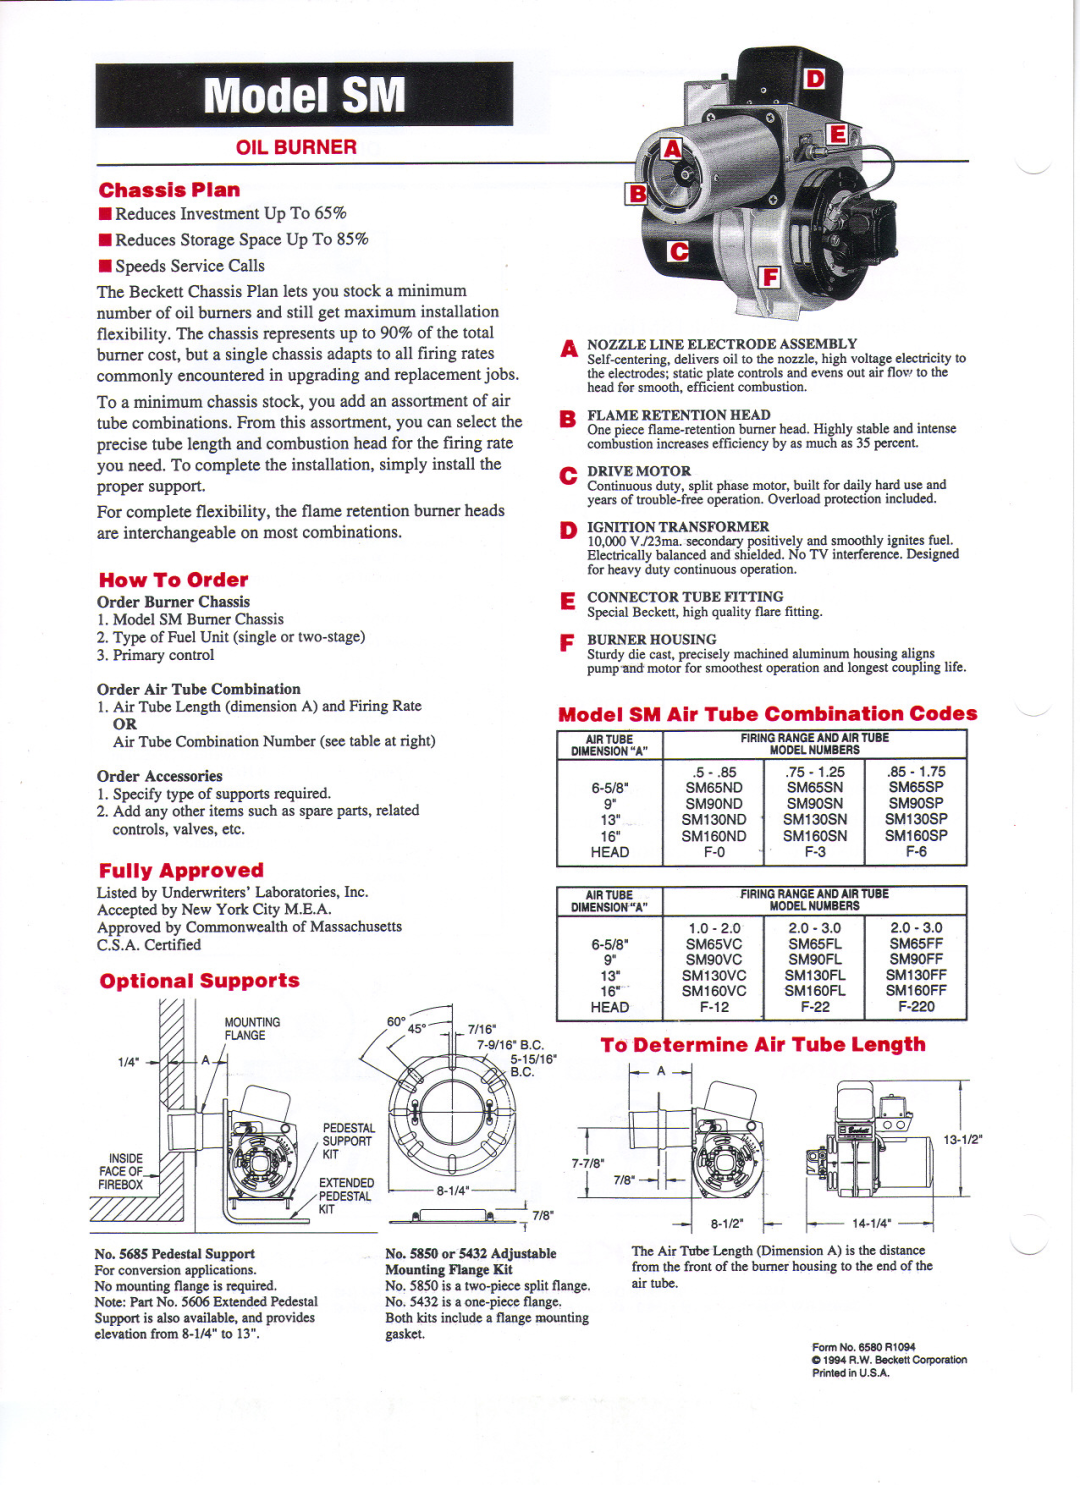 Beckett specifications ModelSM, How To Order, Model SM Air Tube Combination Codes, Fully Approved, Optional Supports 